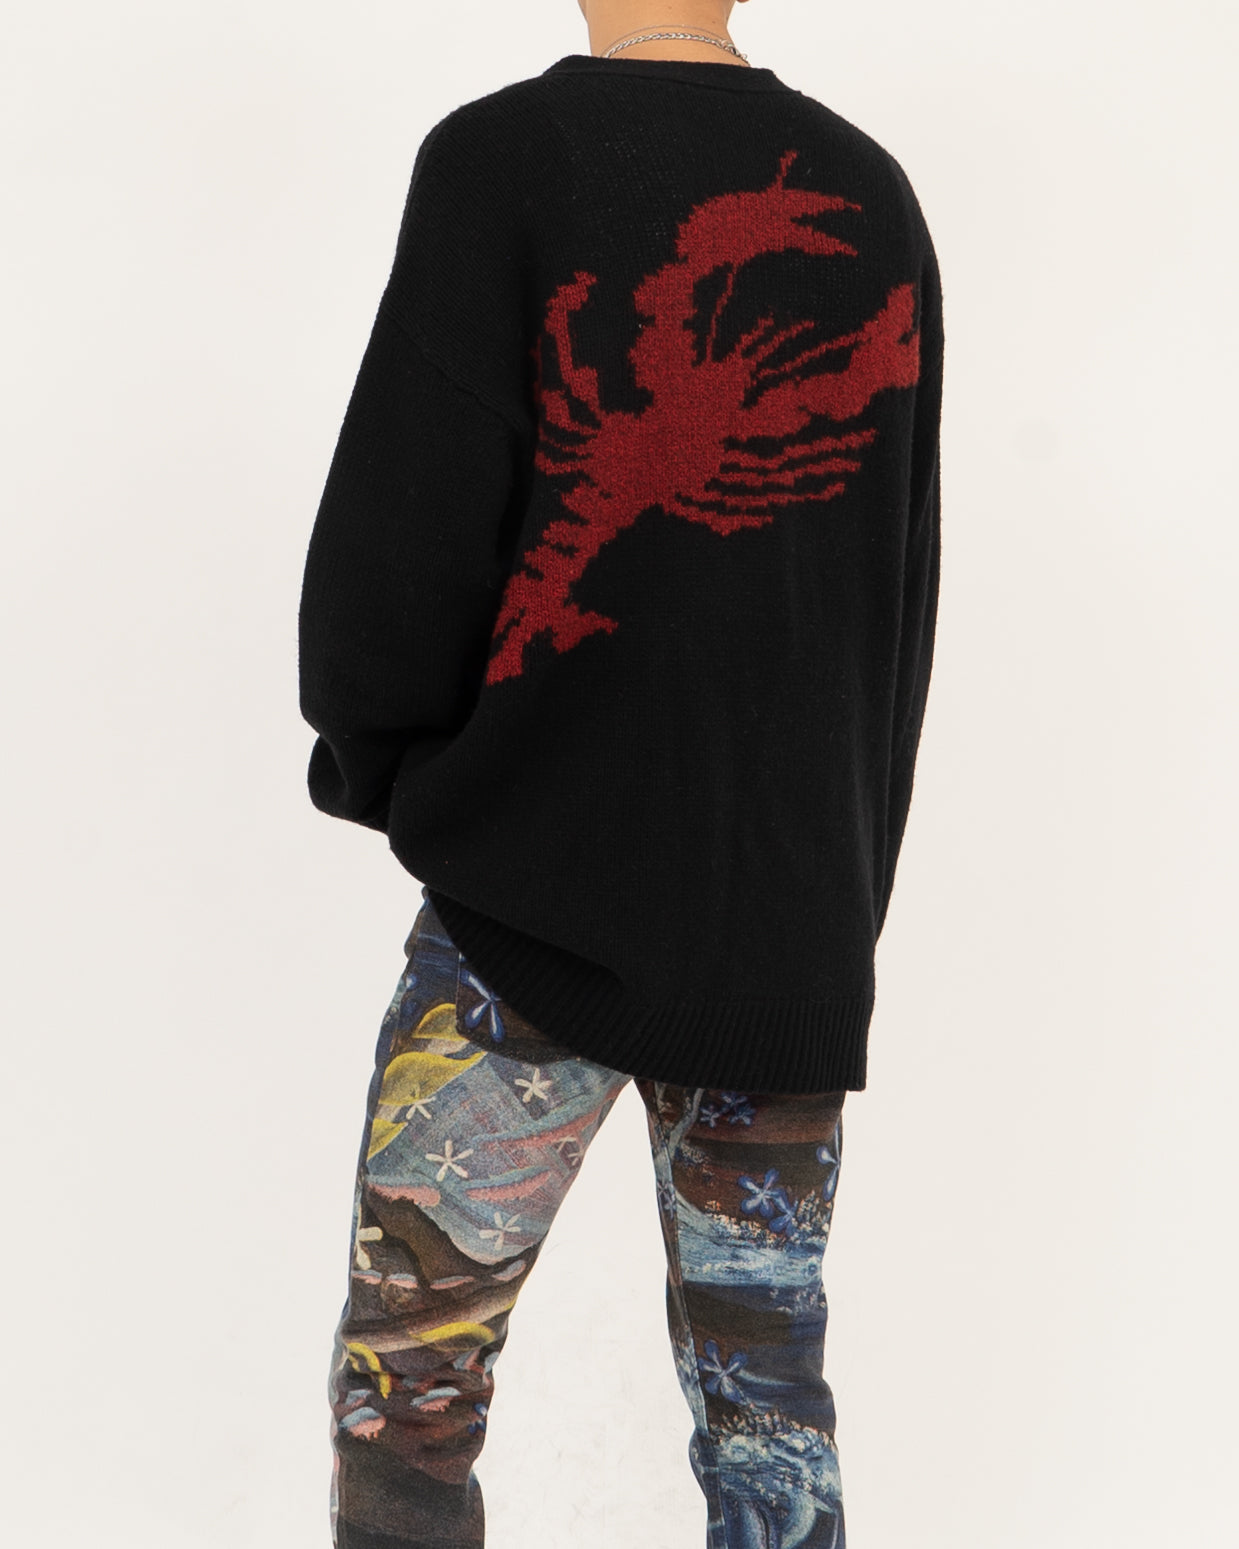 SS16 Lobster Knitted Cardigan